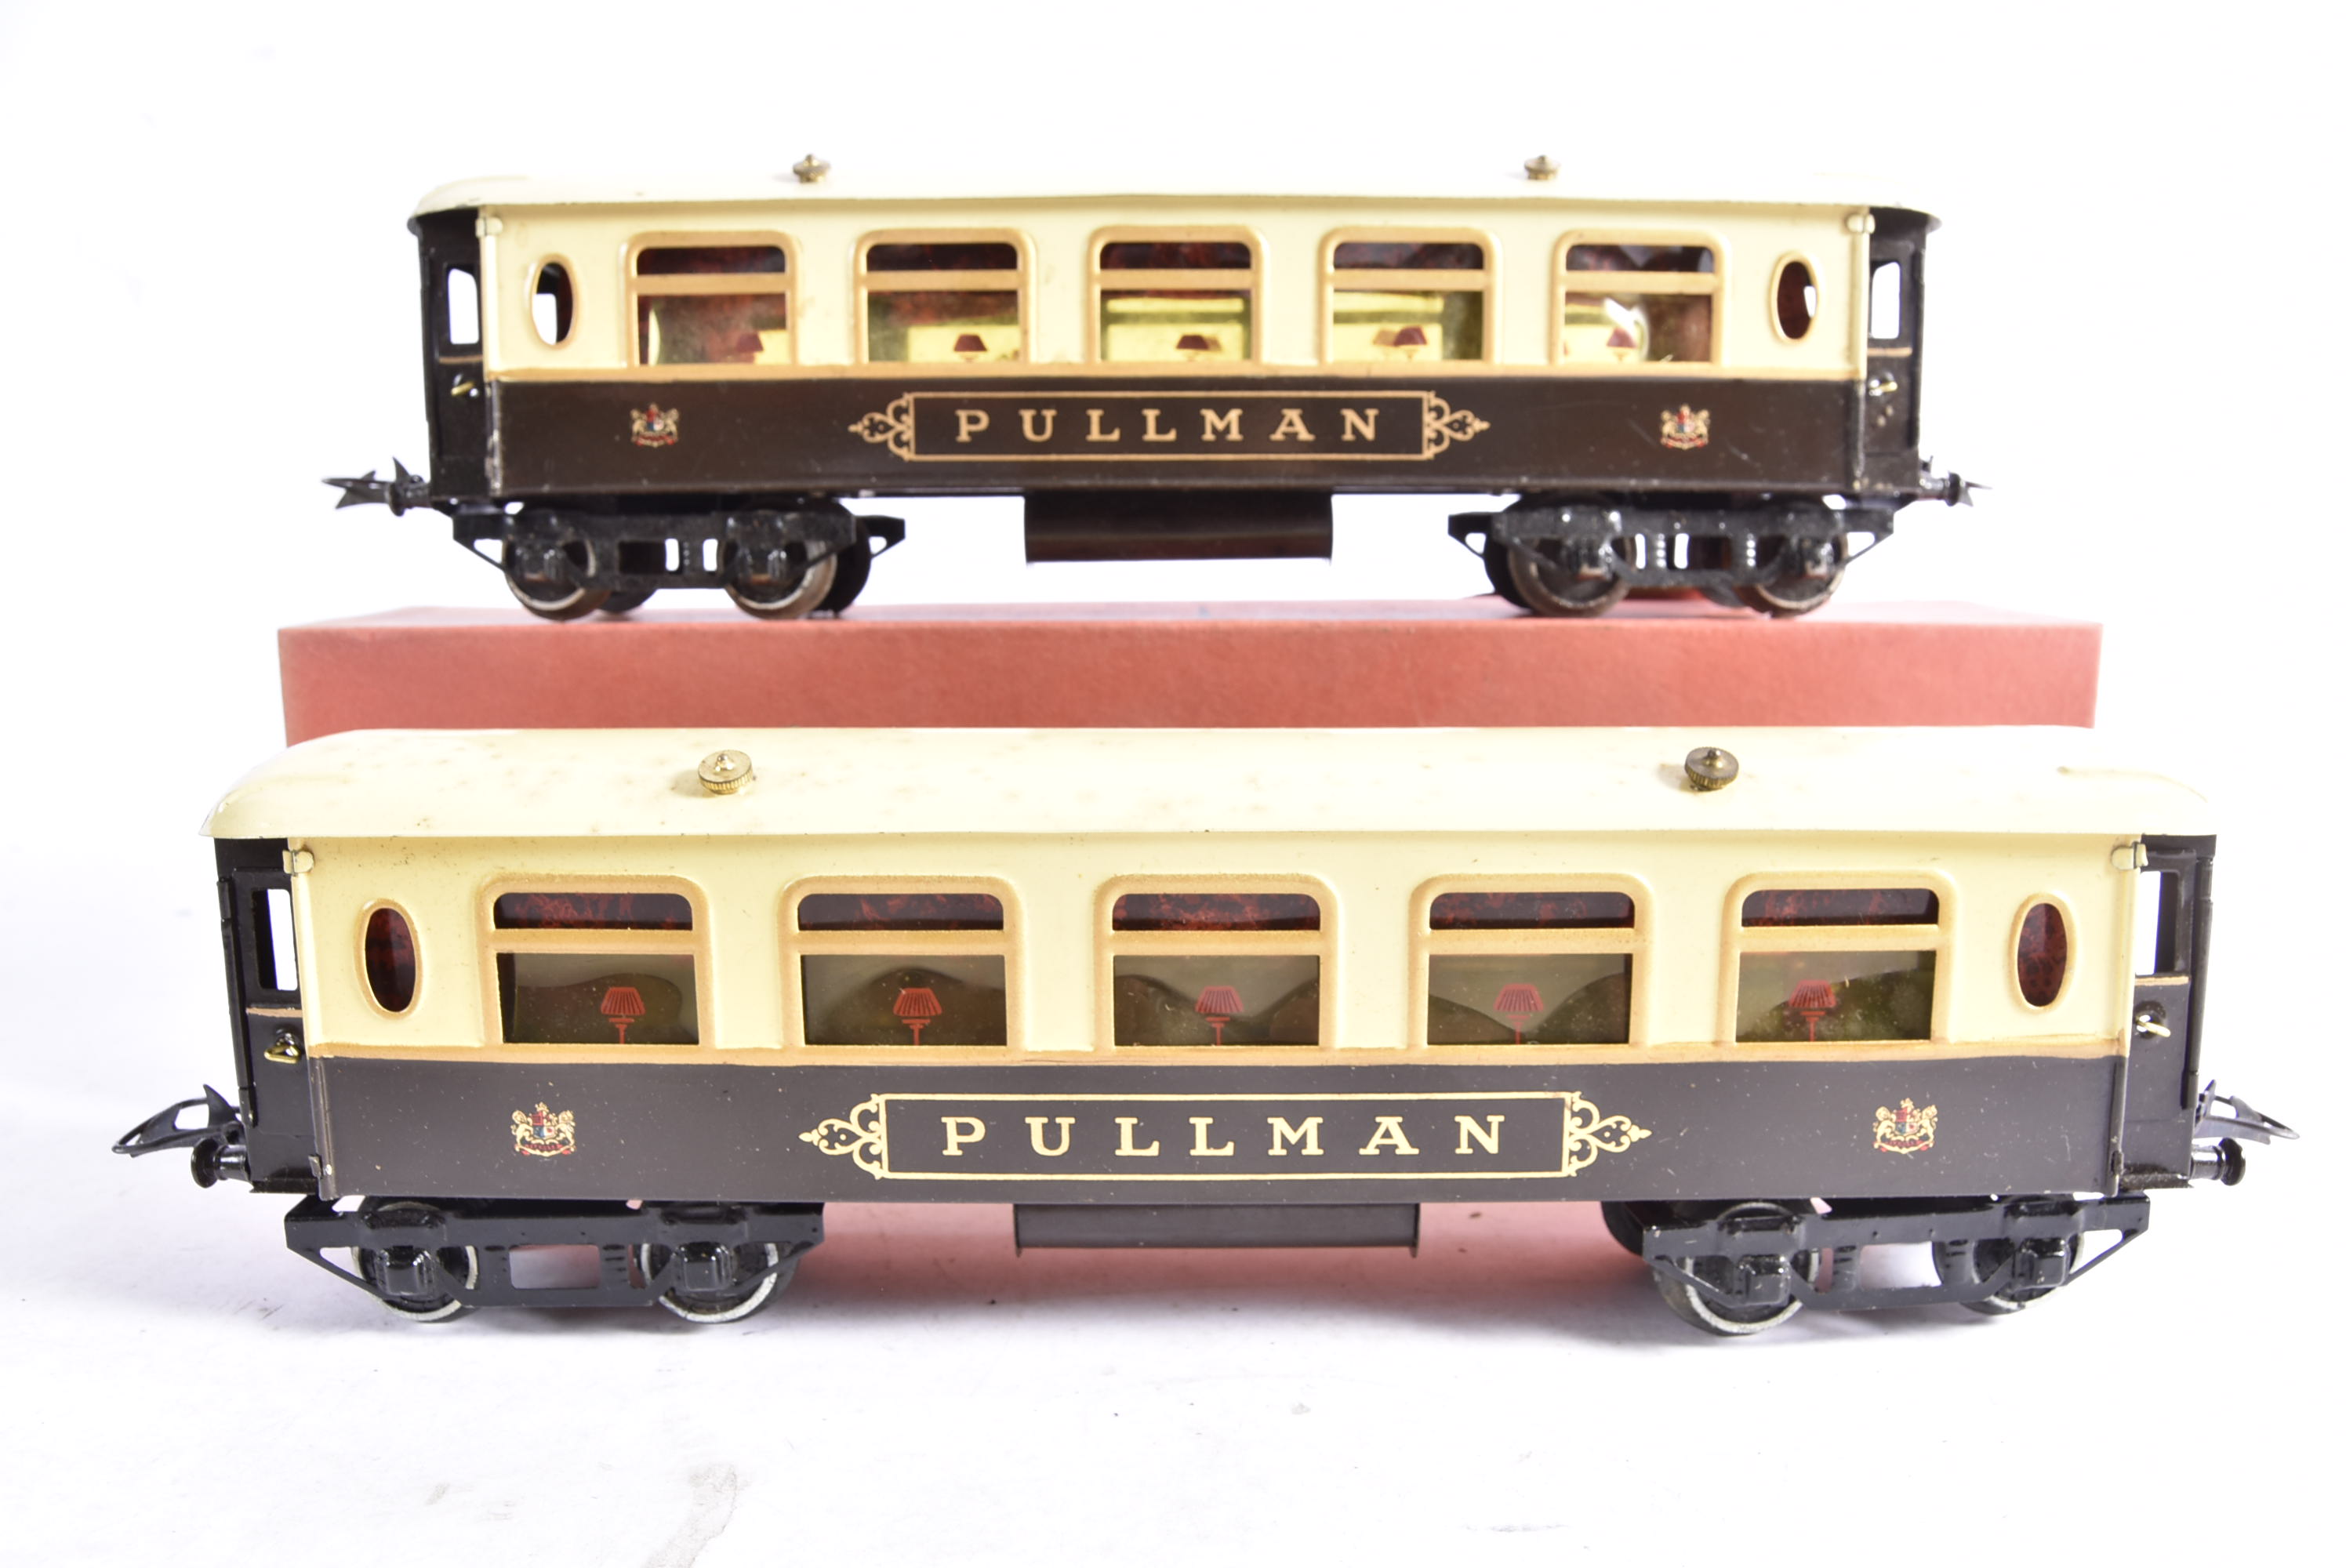 Two Boxed Hornby 0 Gauge No 2 Pullman Coaches, both in umber/cream livery with small Pullman